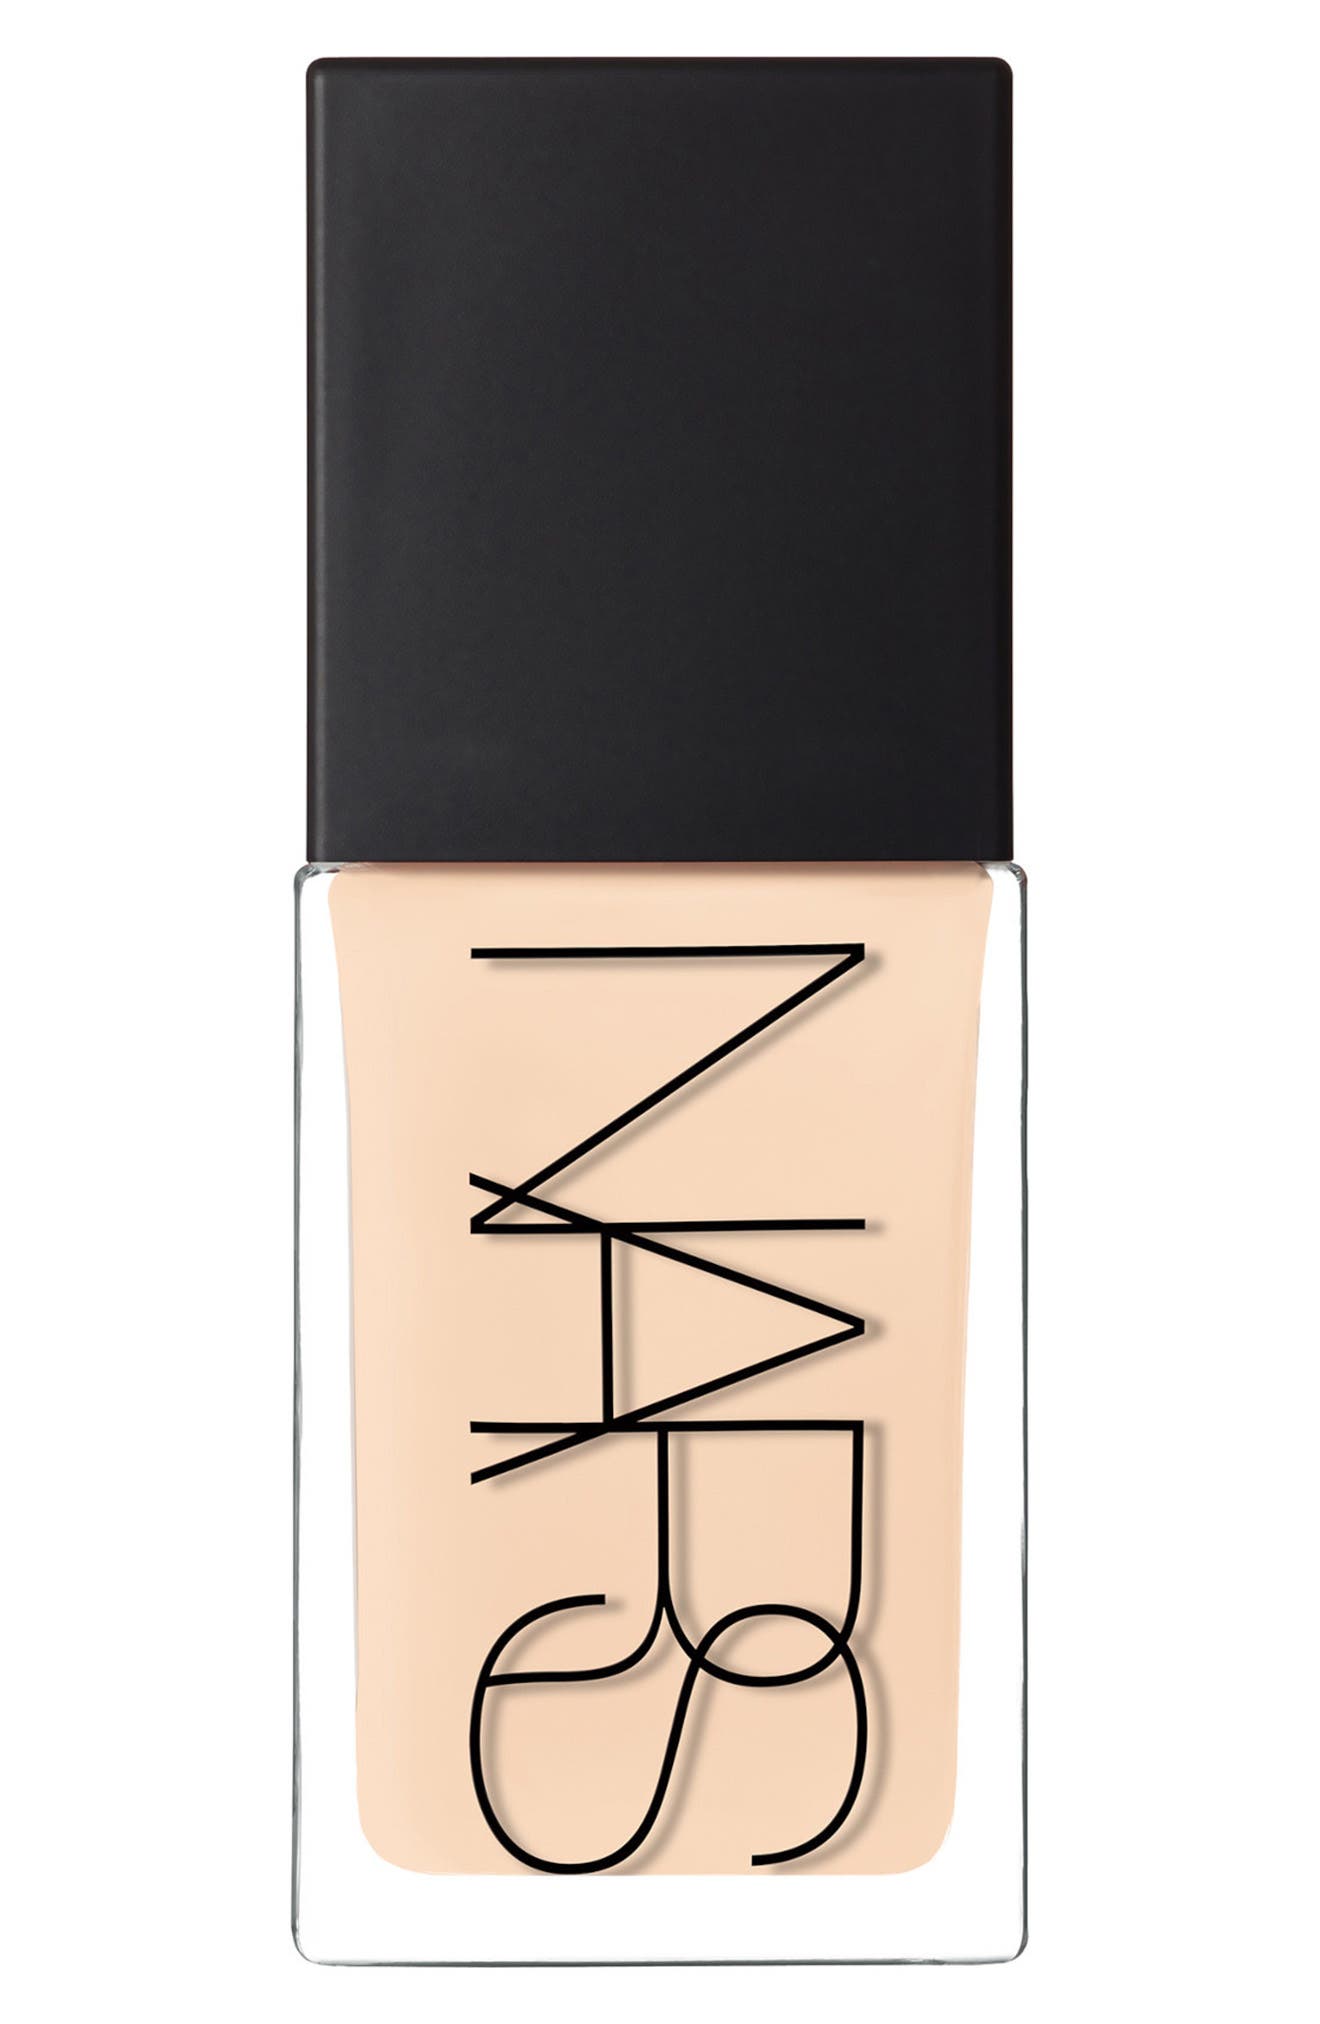 UPC 194251070384 product image for NARS Light Reflecting Foundation in Mont Blanc at Nordstrom | upcitemdb.com